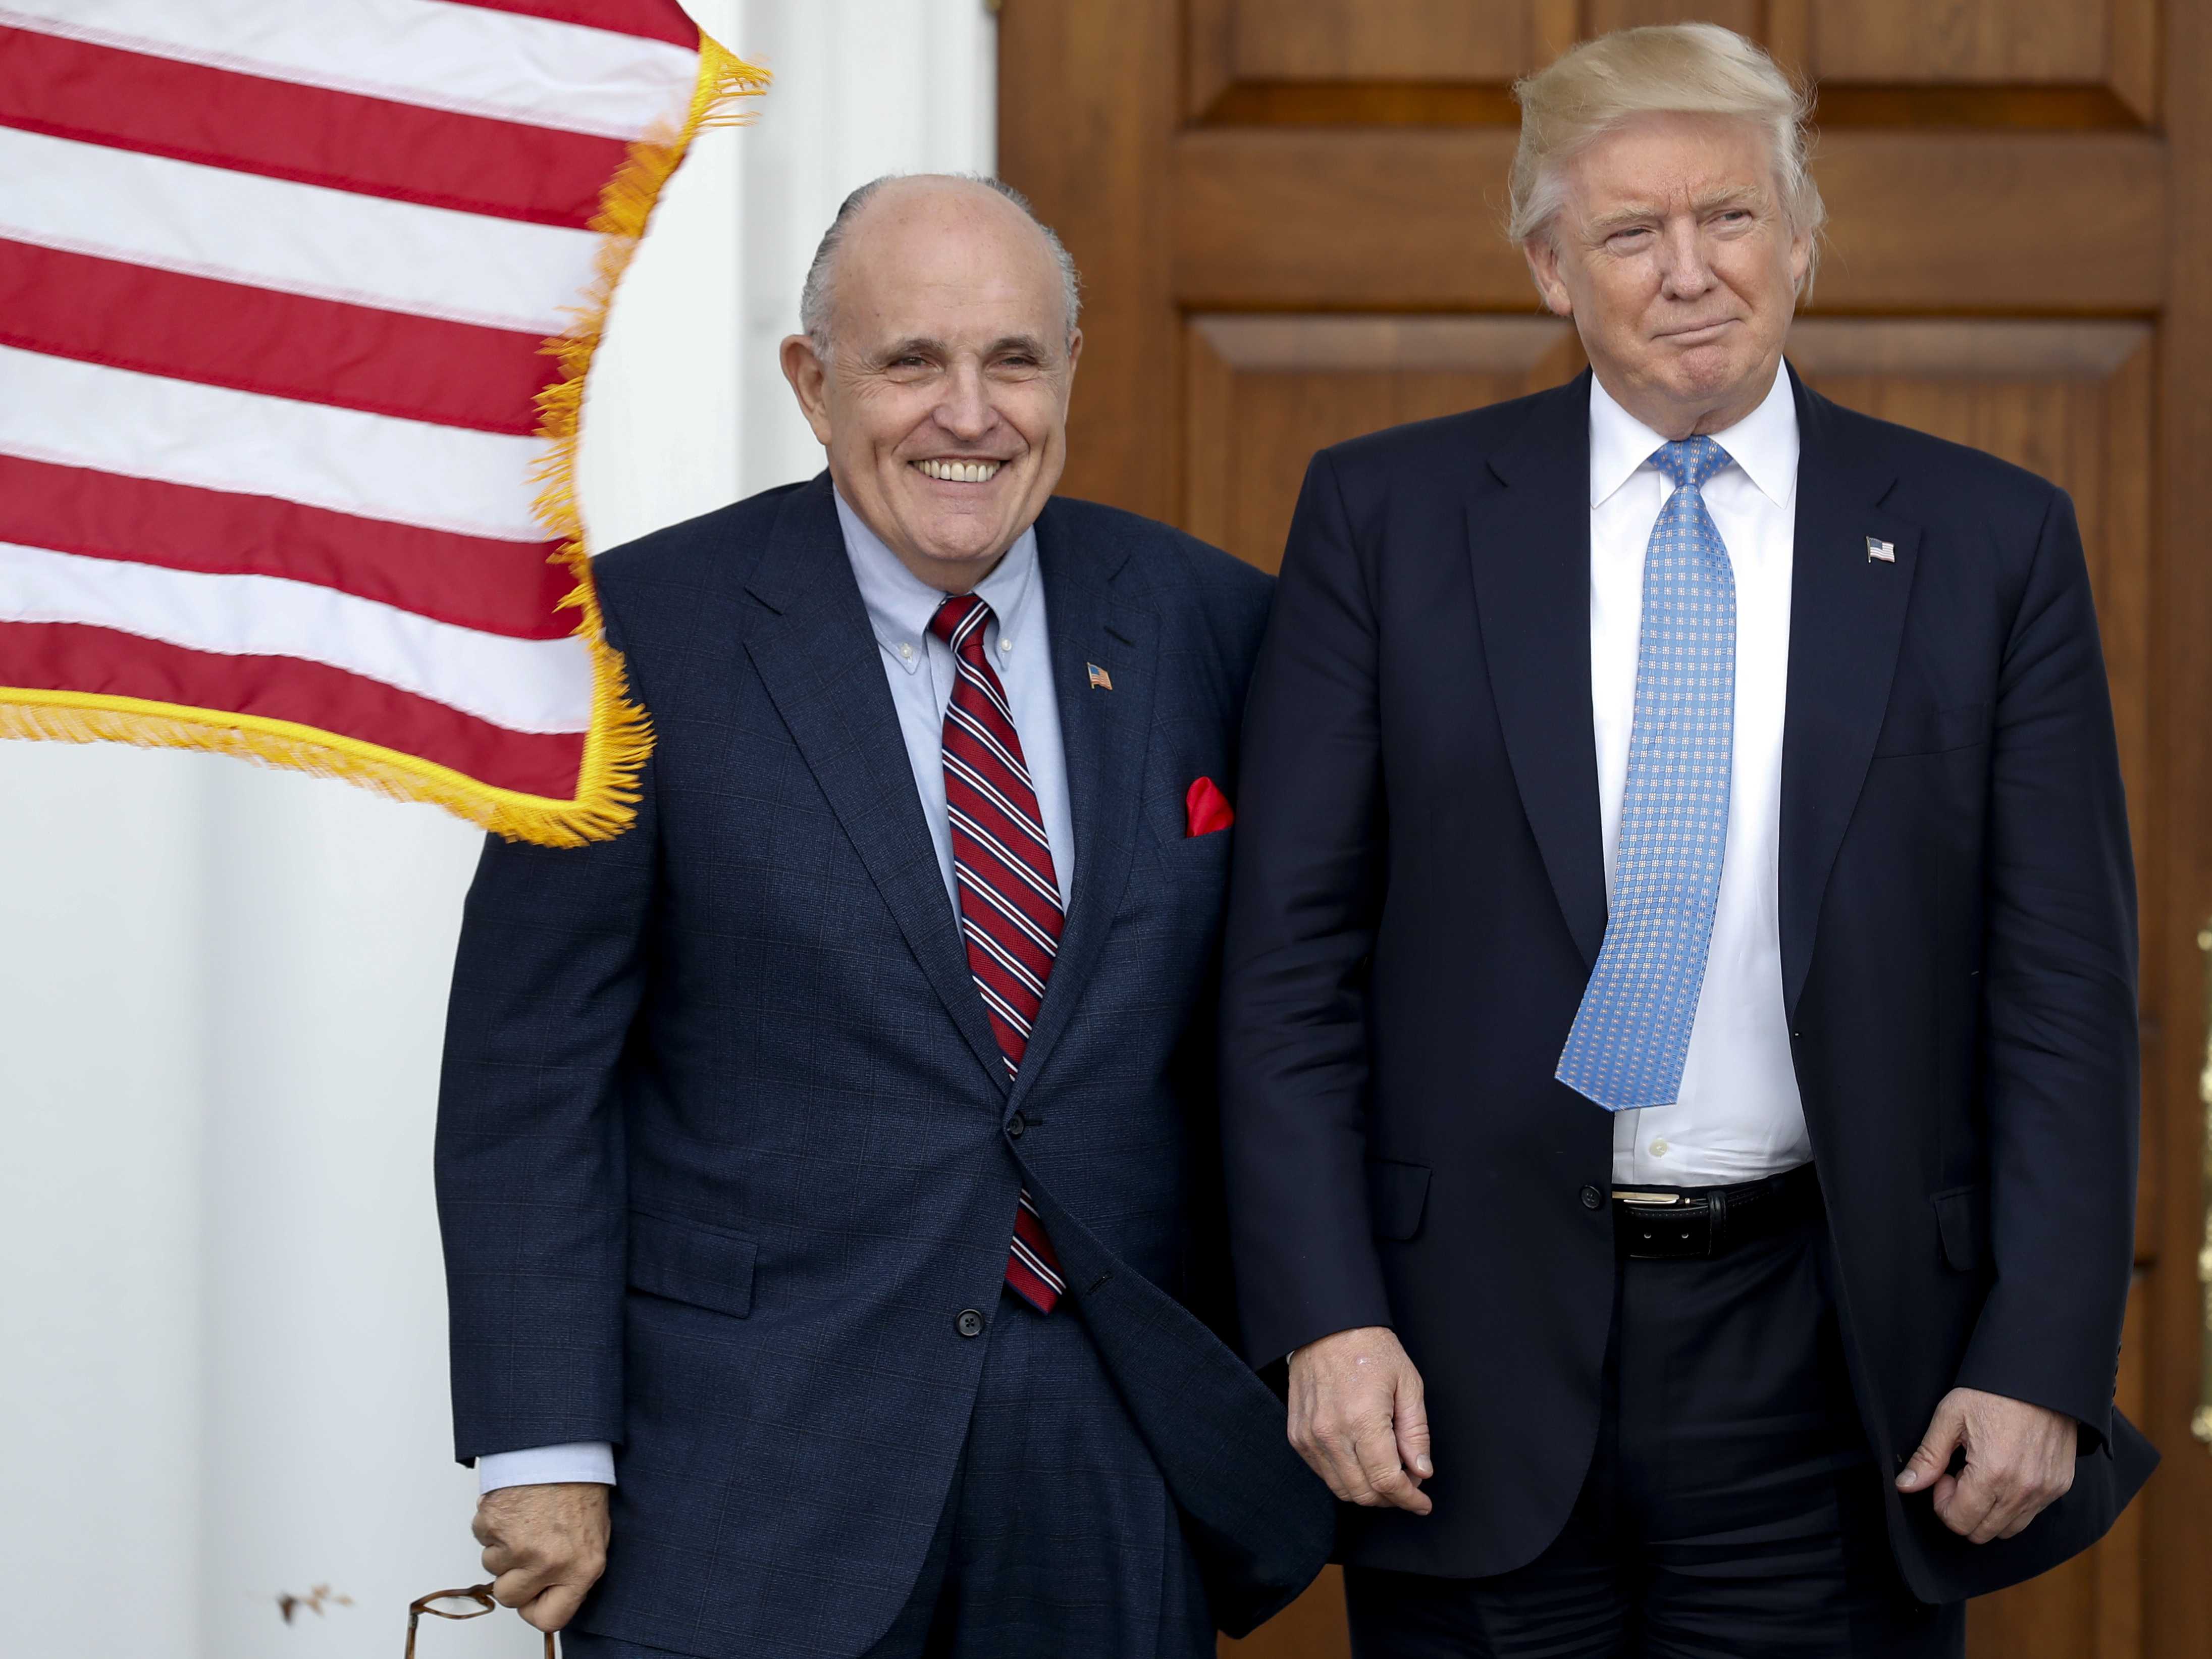 Rudy Giuliani, left, is seen here with Donald Trump shortly after Trump's election victory in 2016. Federal authorities raided Giuliani's apartment Wednesday, the former New York City mayor's attorney said. Carolyn Kaster/AP